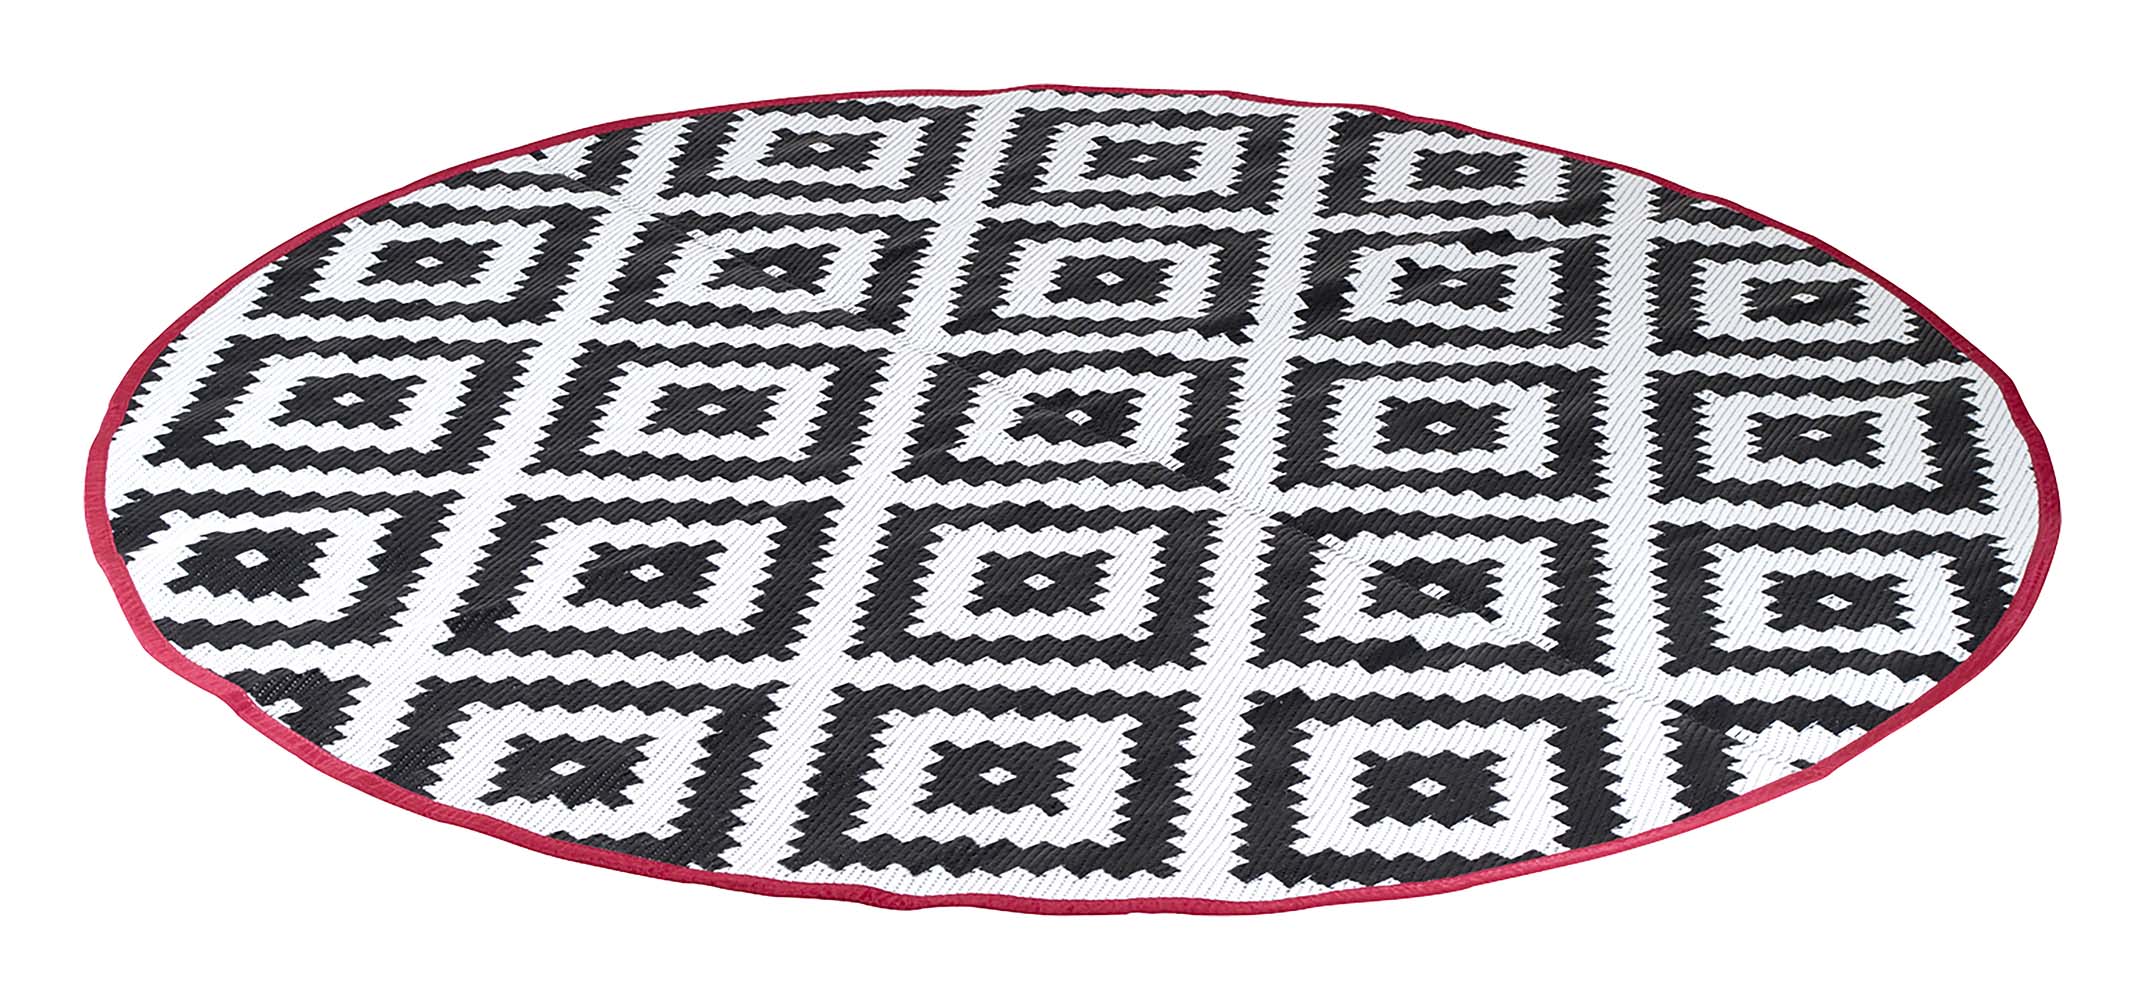 Bo-Camp - Urban Outdoor collection - Chill mat - Falconwood  - Round